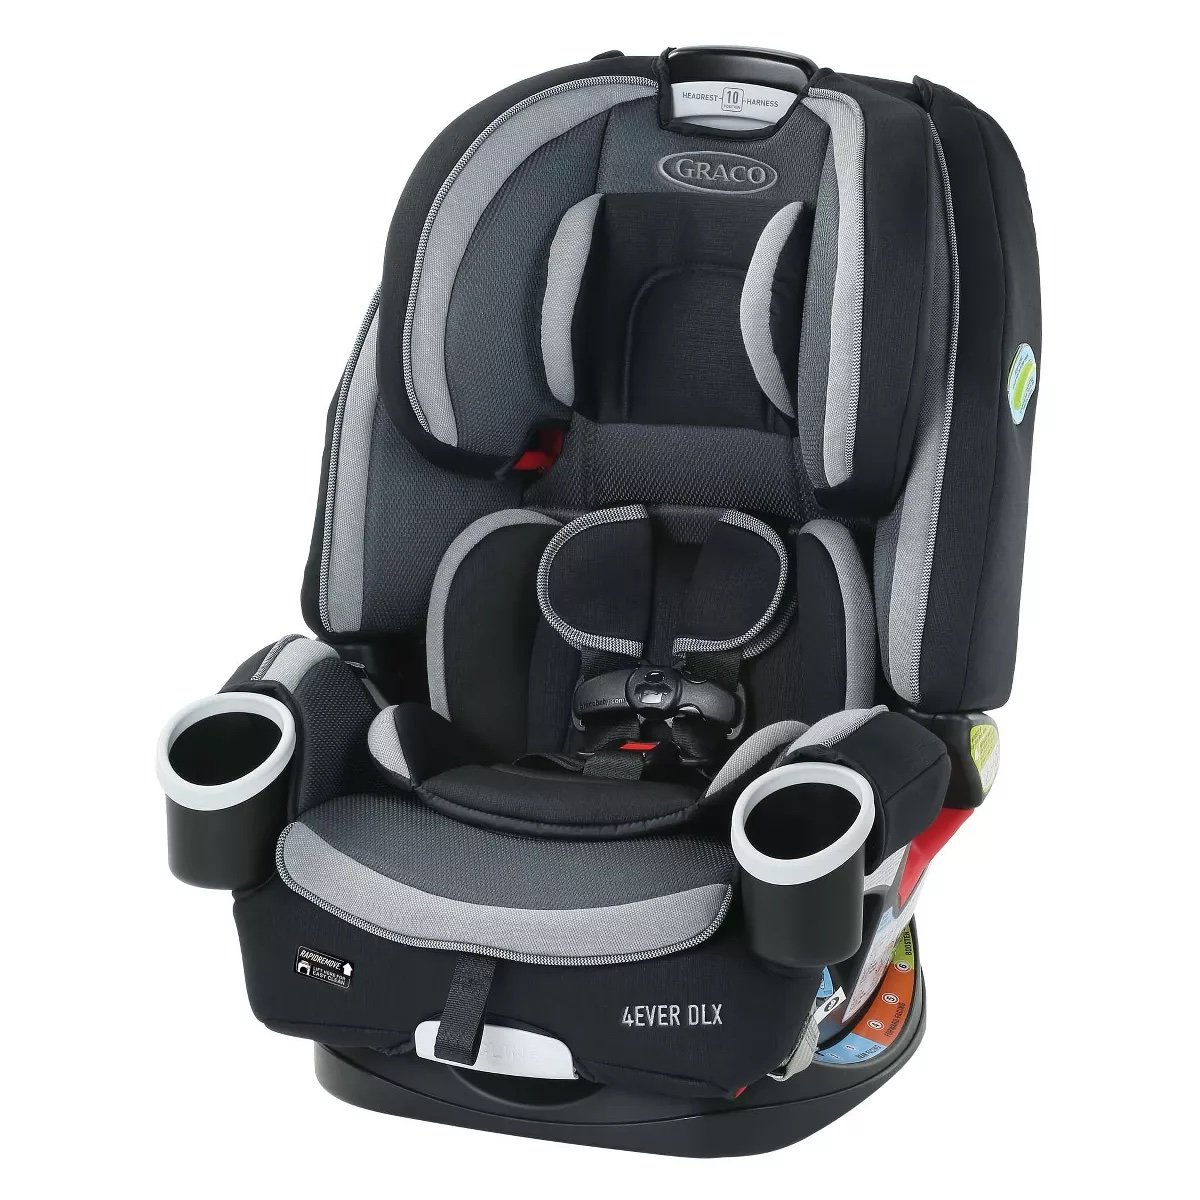 Up to 40% off select baby carseats, strollers, and more